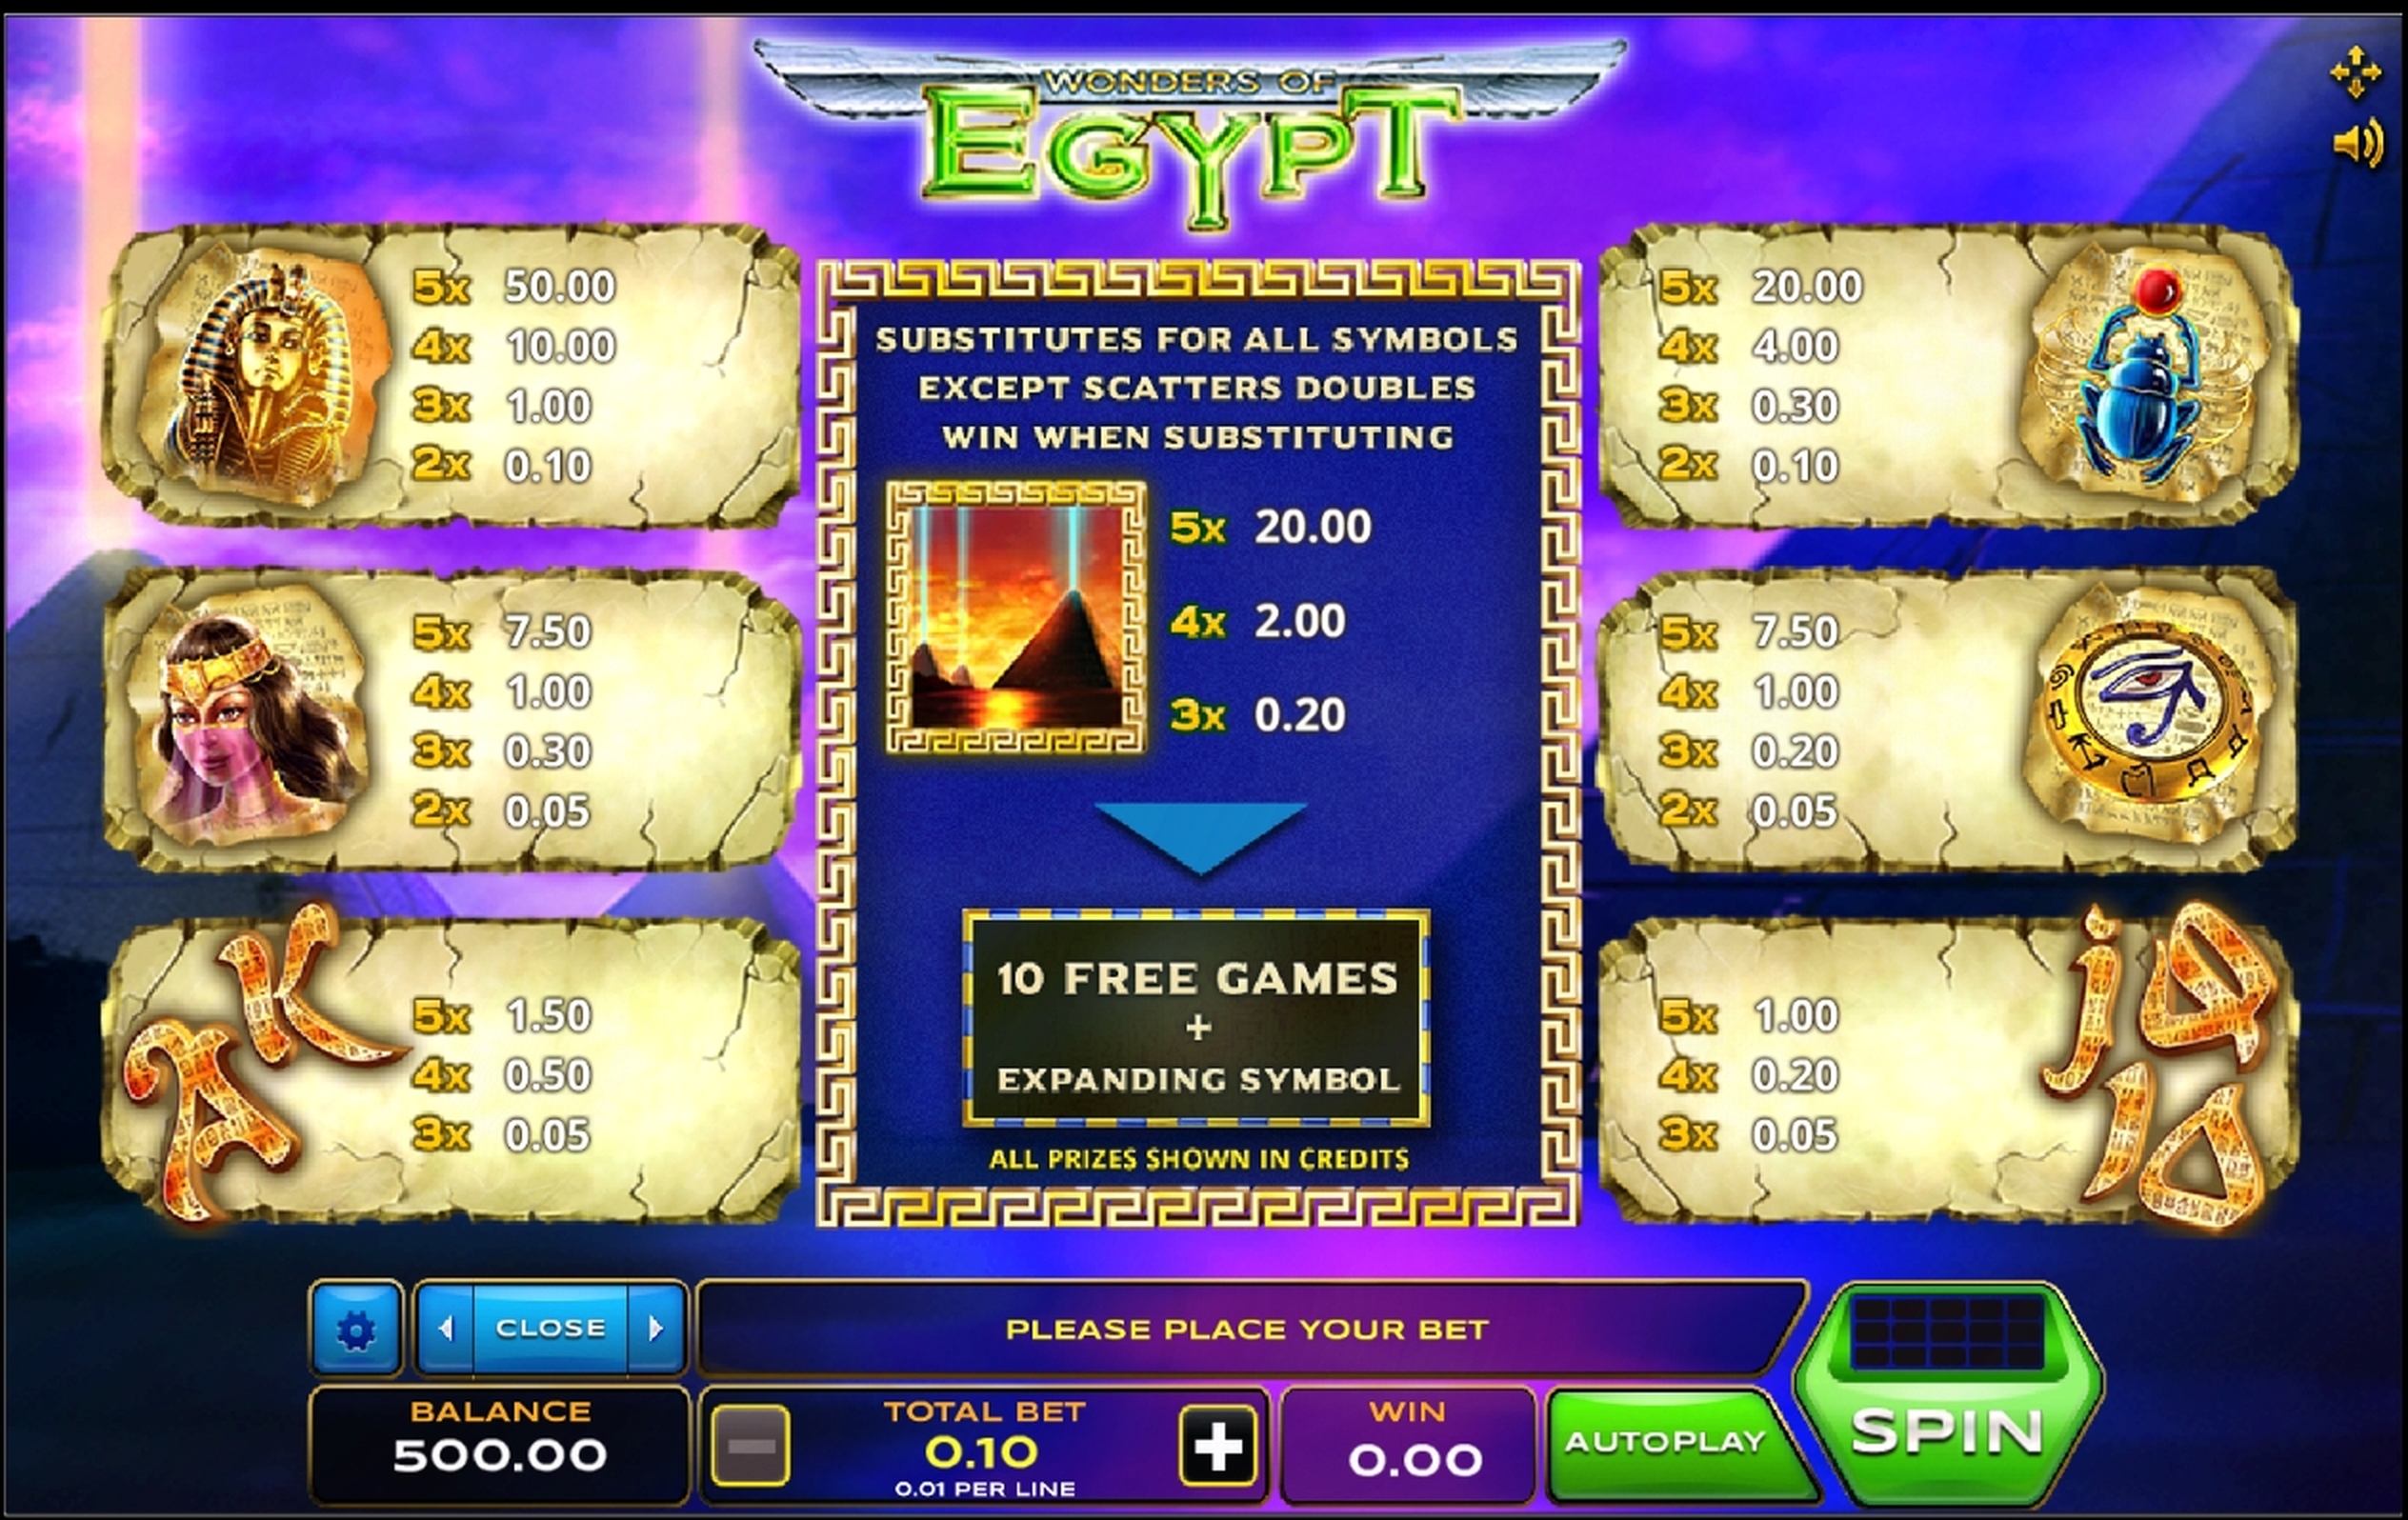 Info of Wonders of Egypt Slot Game by Xplosive Slots Group